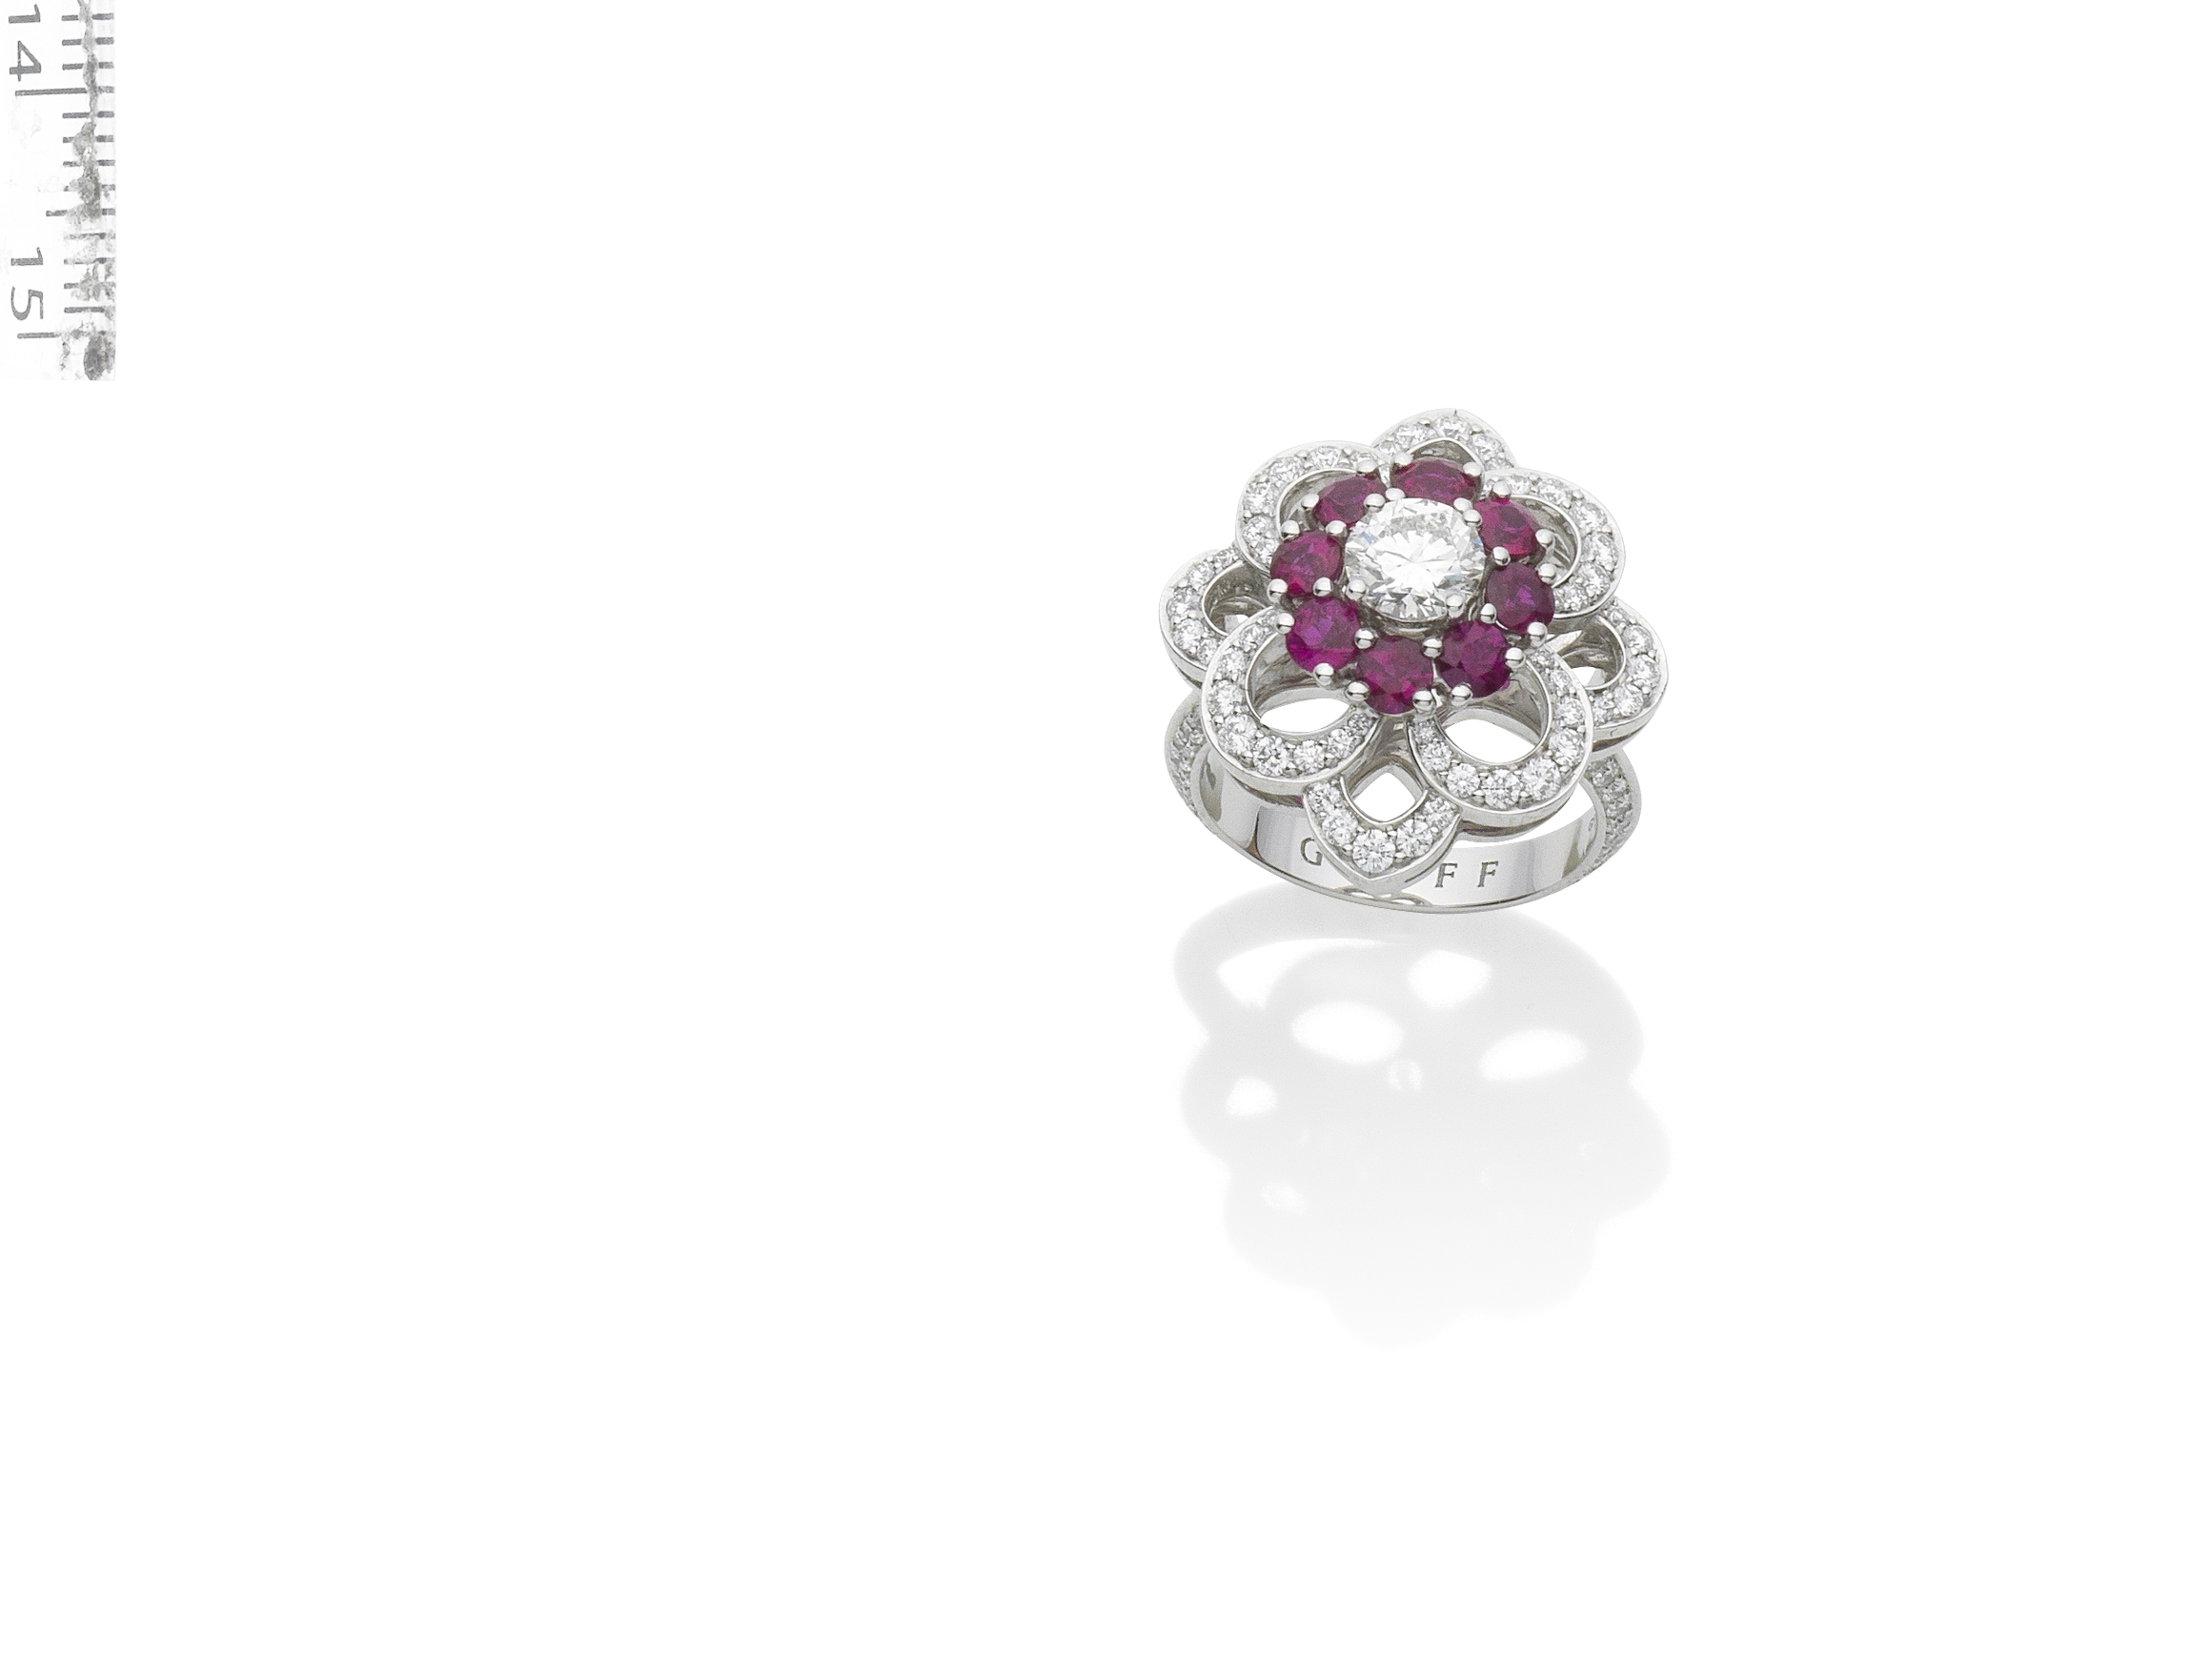 A RUBY AND DIAMOND 'ROSETTE' RING, BY GRAFF